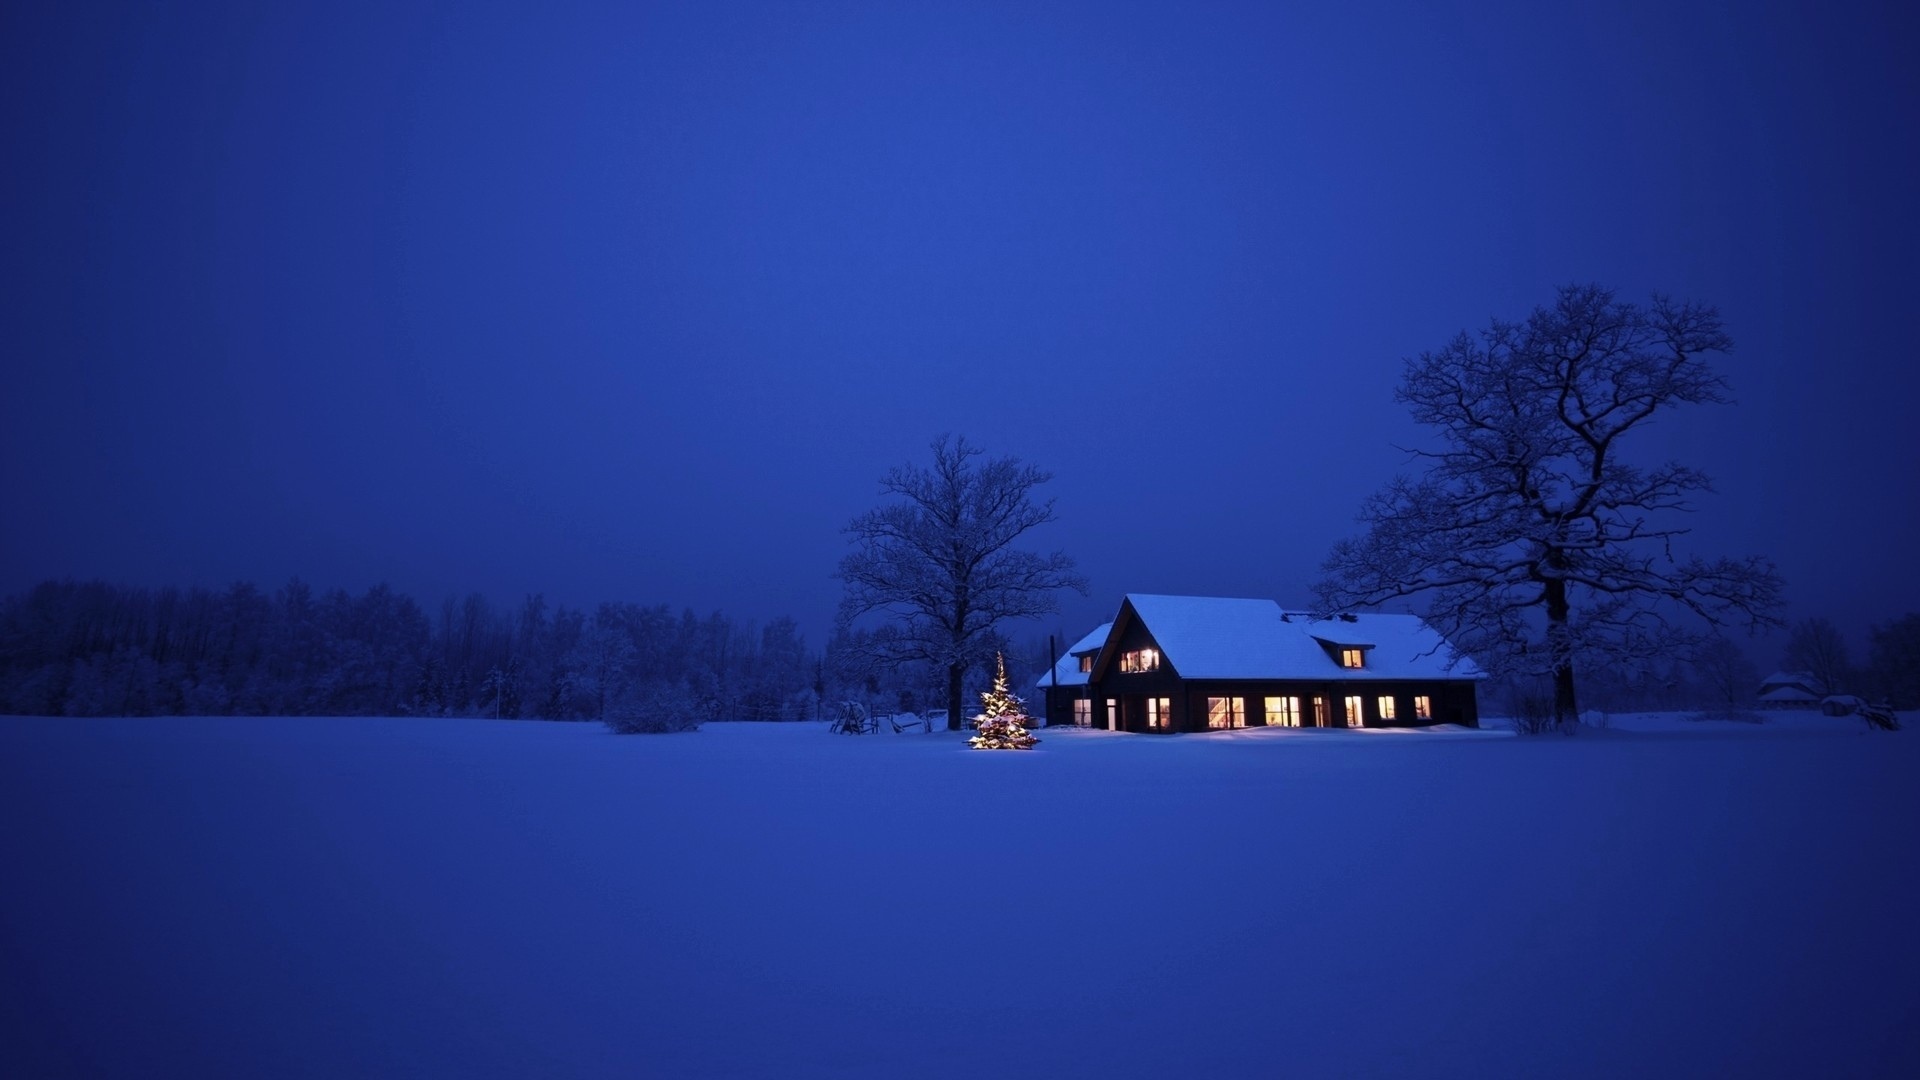 snow, christmas xmas, houses, new year, landscape, holidays, winter, blue Aesthetic wallpaper